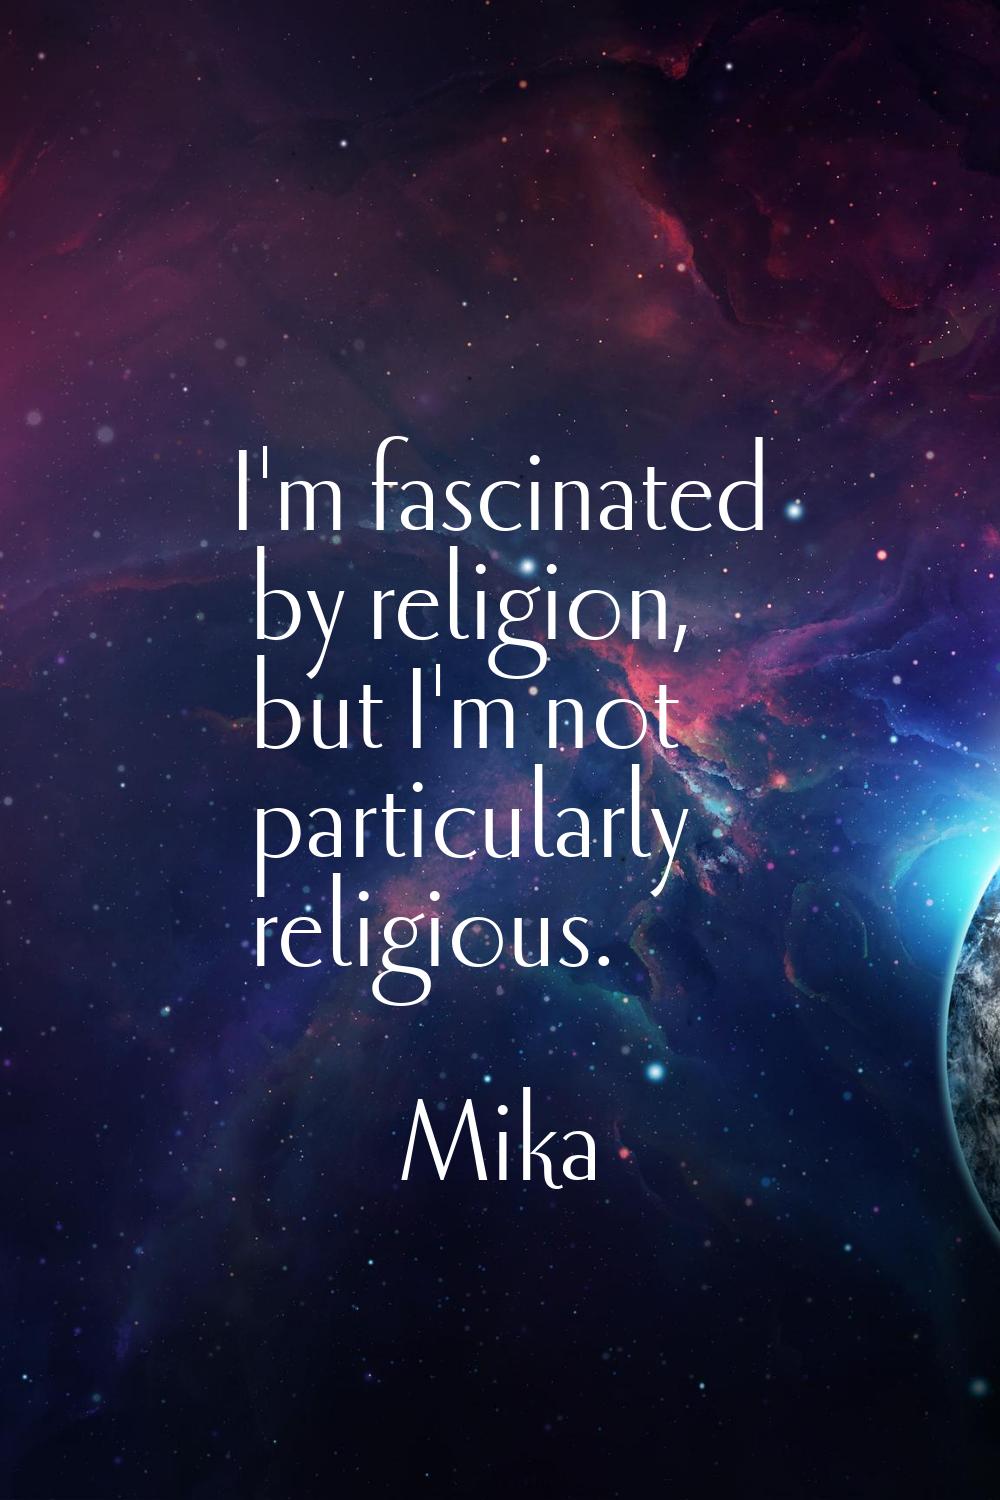 I'm fascinated by religion, but I'm not particularly religious.